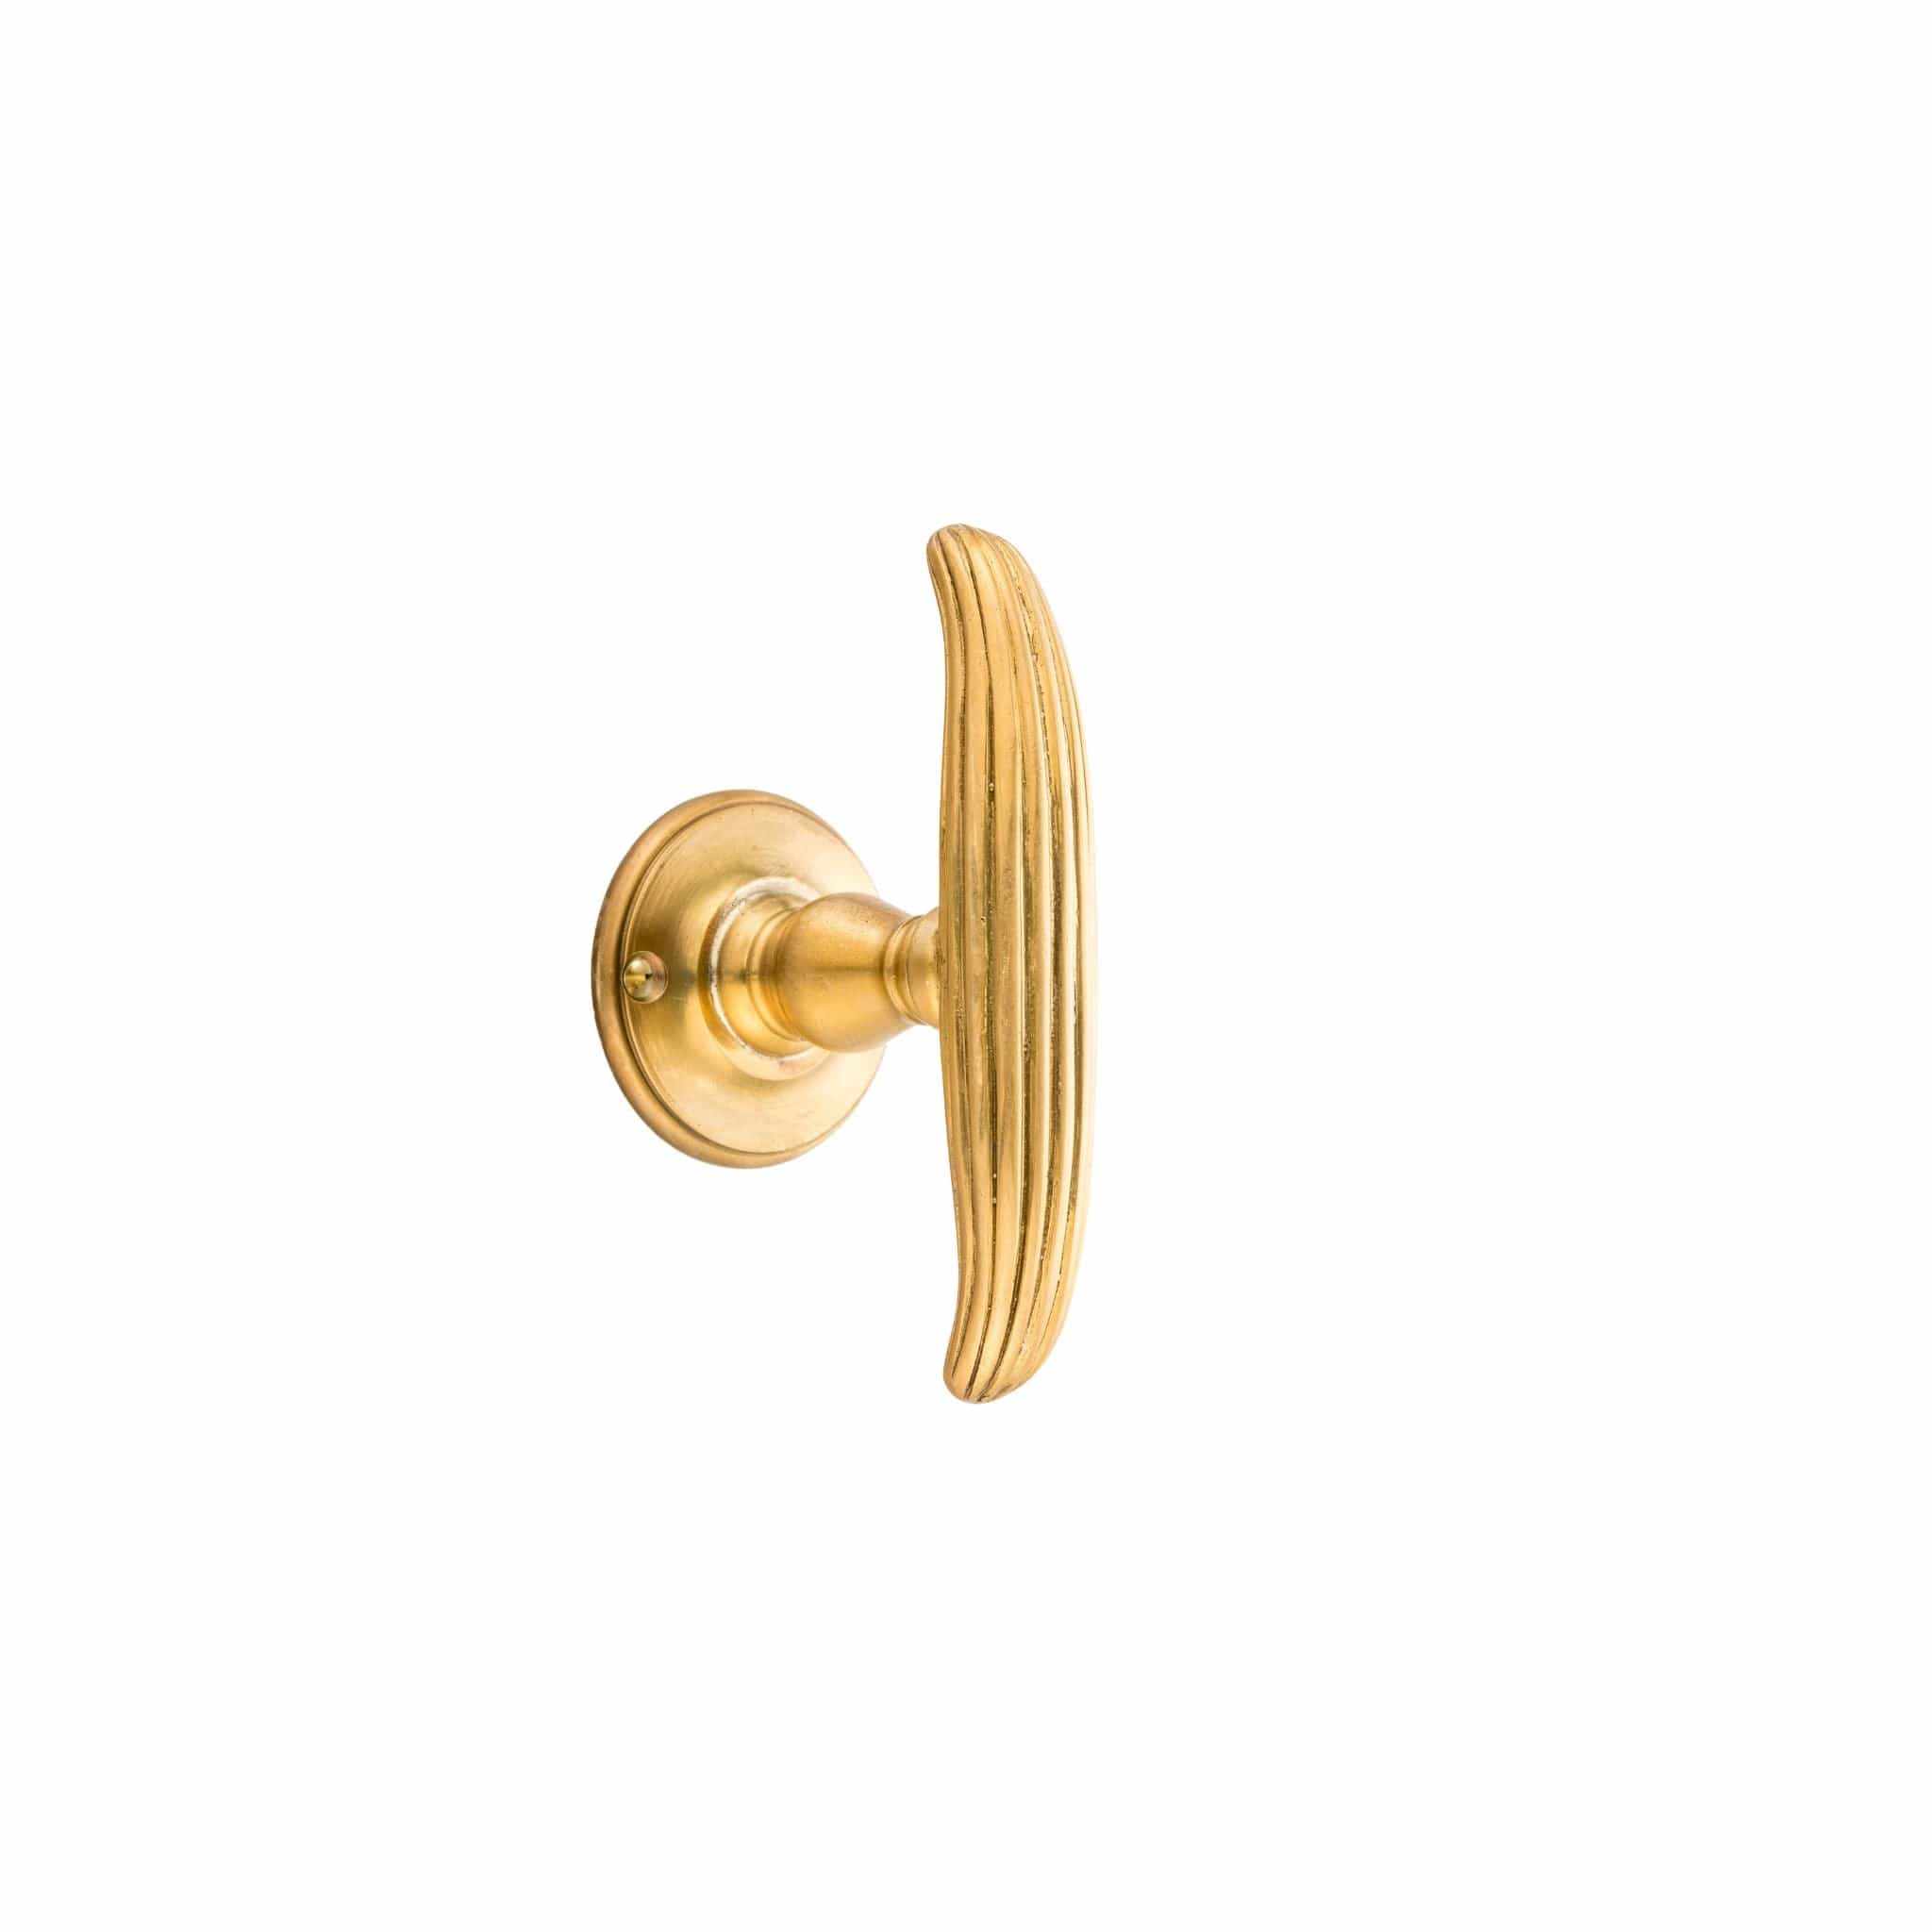 Novecento brass curved window handle with grooves - ilbronzetto